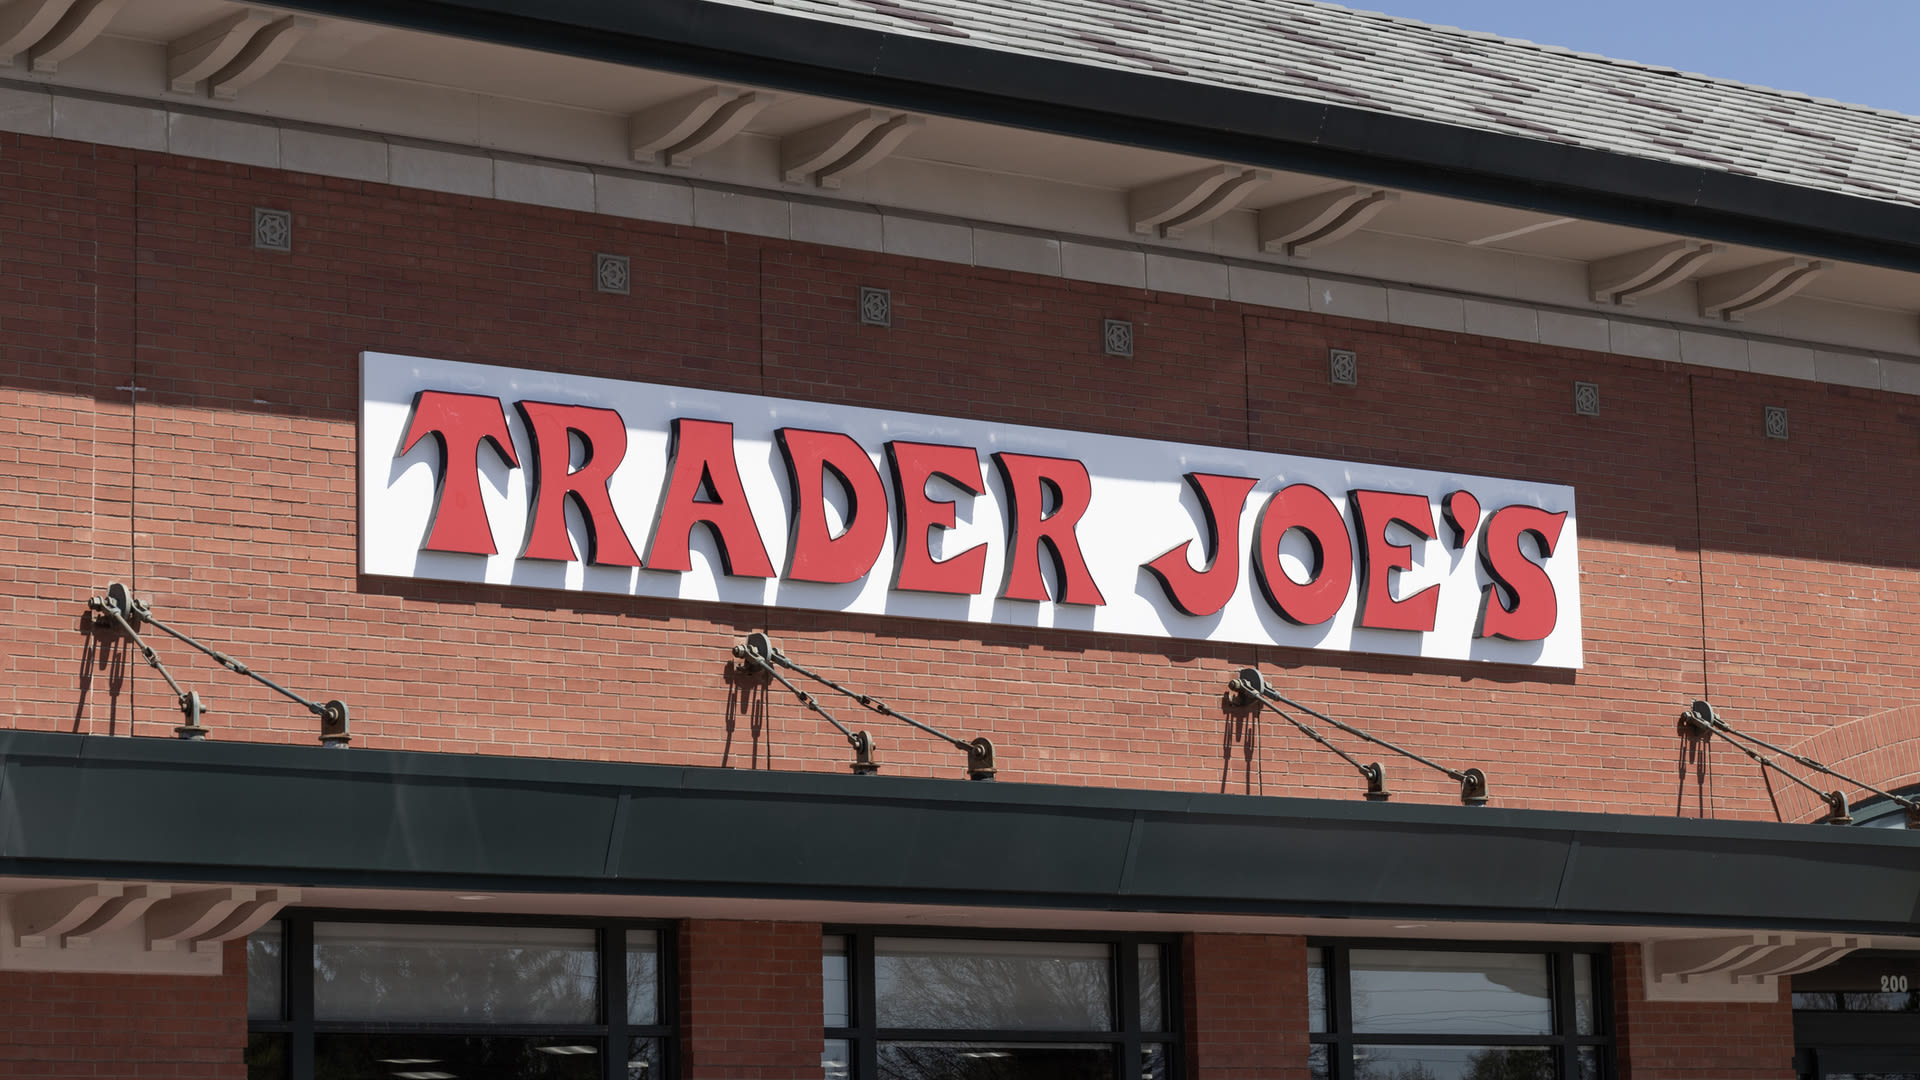 10 Top Items To Buy at Trader Joe’s With a $50 Grocery Budget